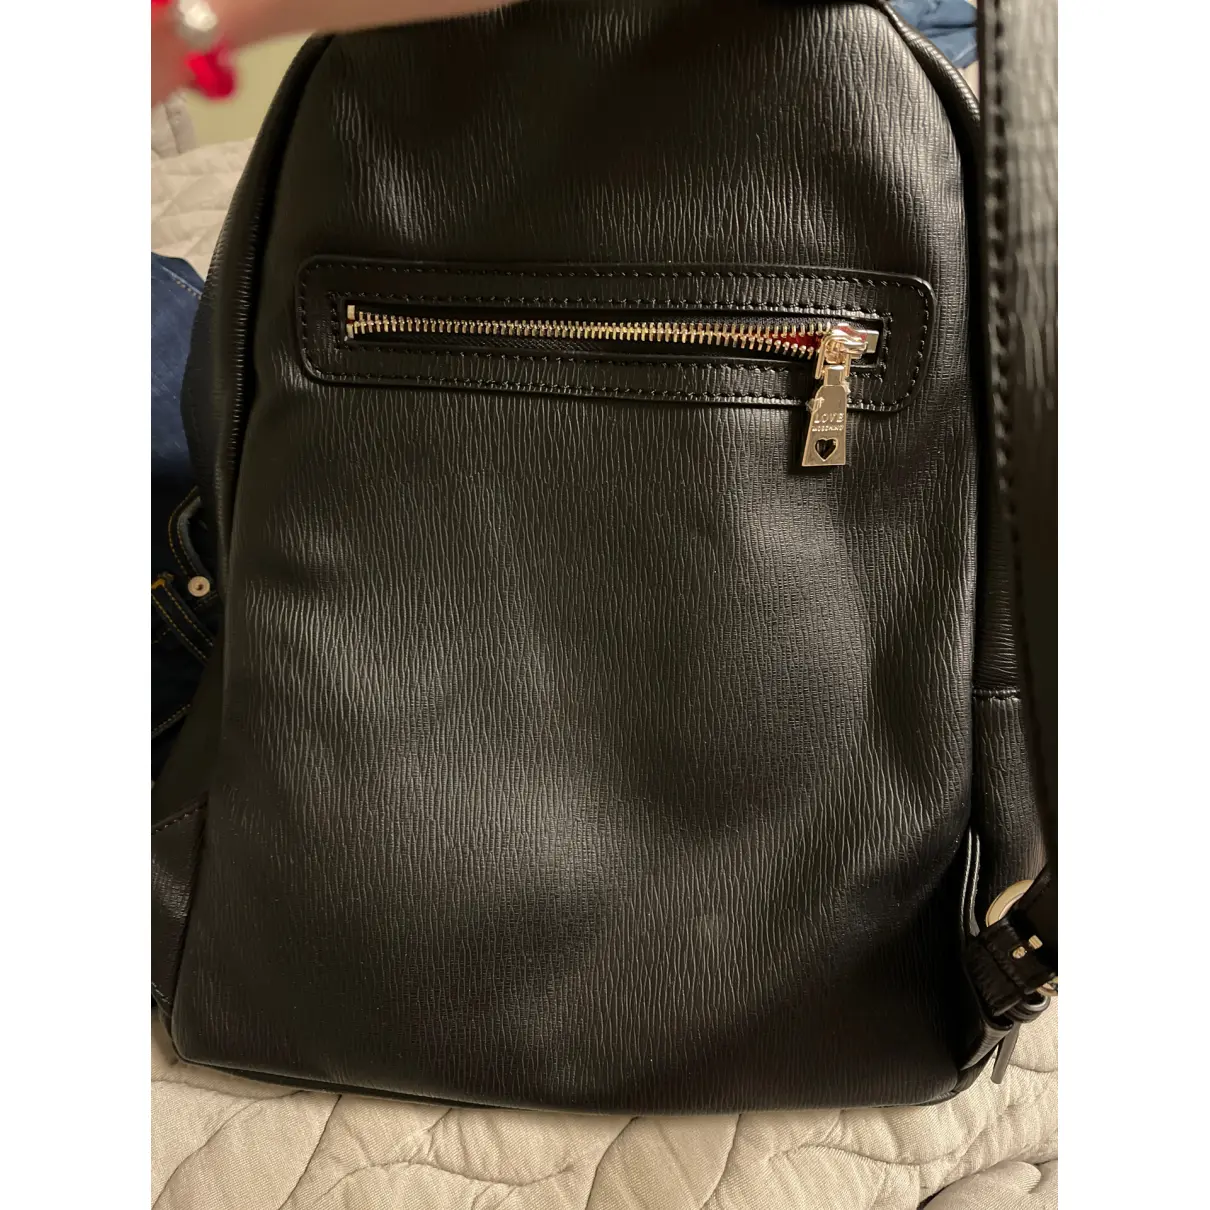 Buy Moschino Love Leather backpack online